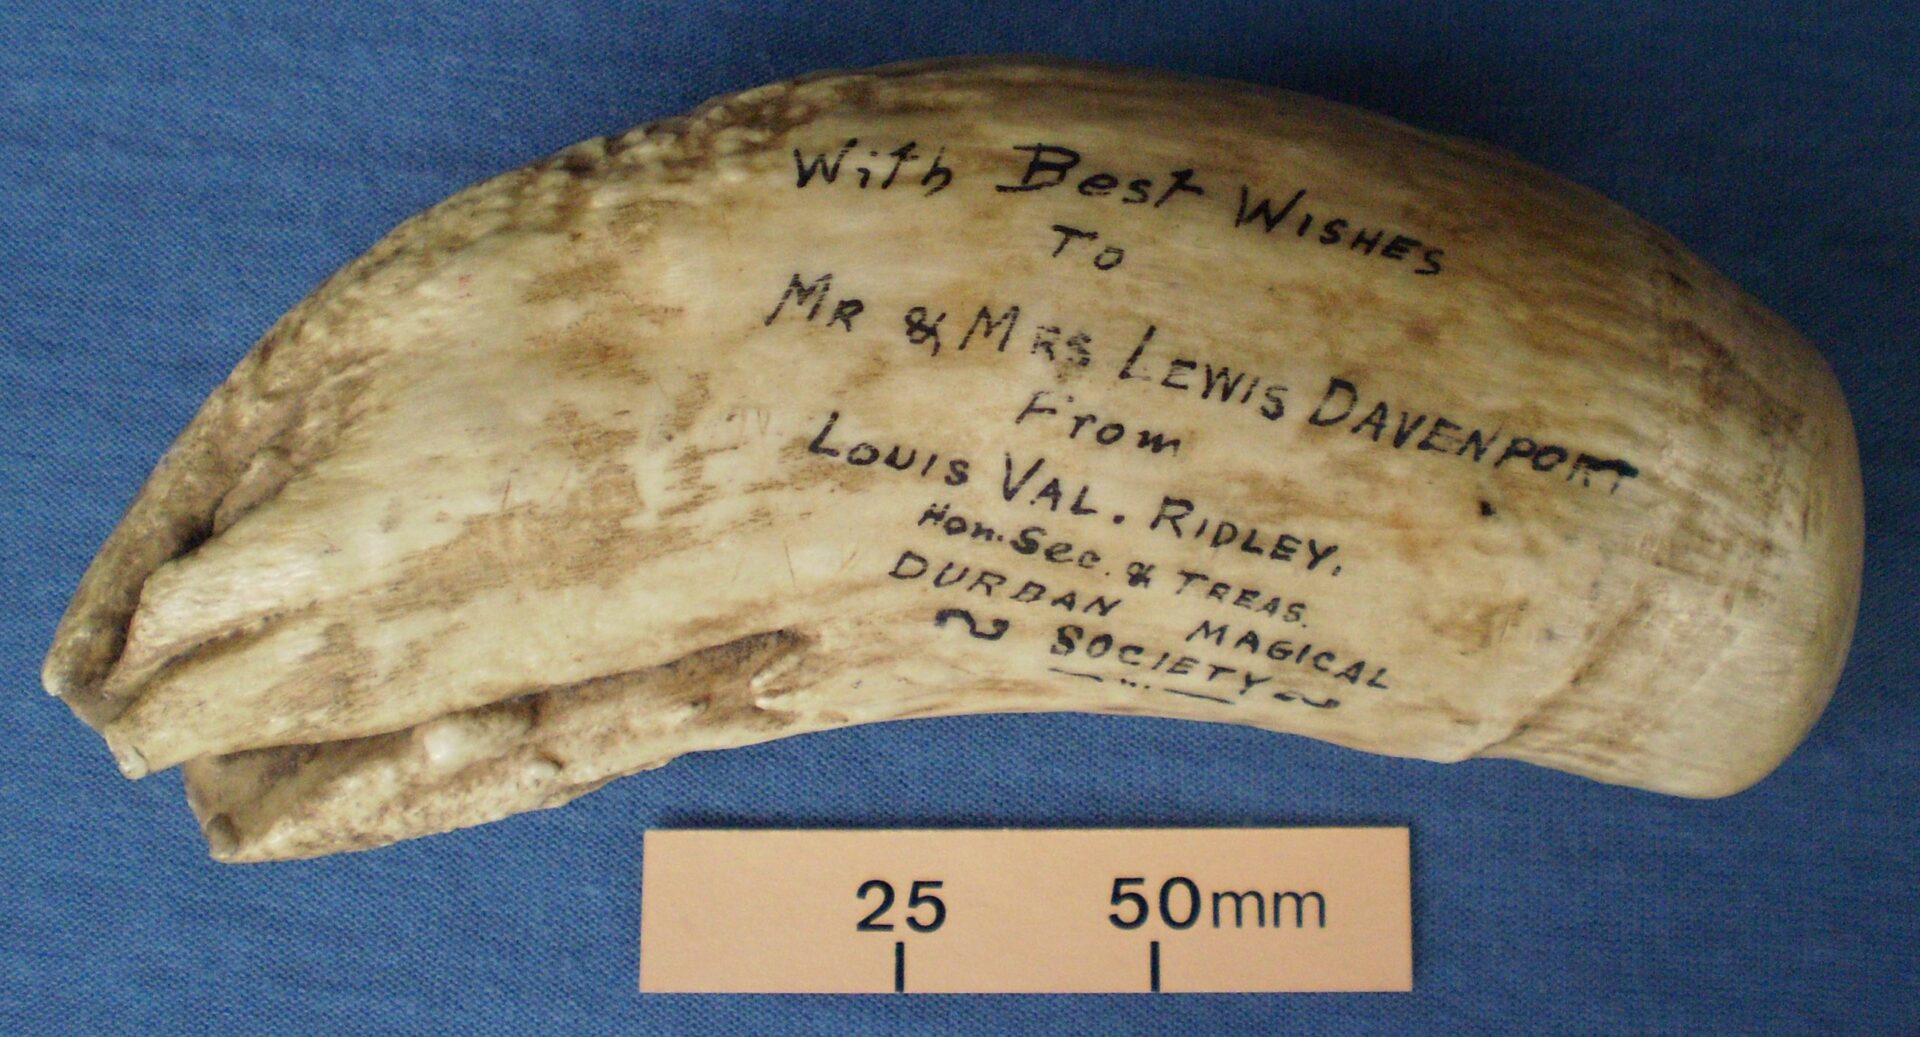 Whale’s tooth gift from Louis Val. Ridley, Durban Magical Society, to Mr and Mrs Lewis Davenport